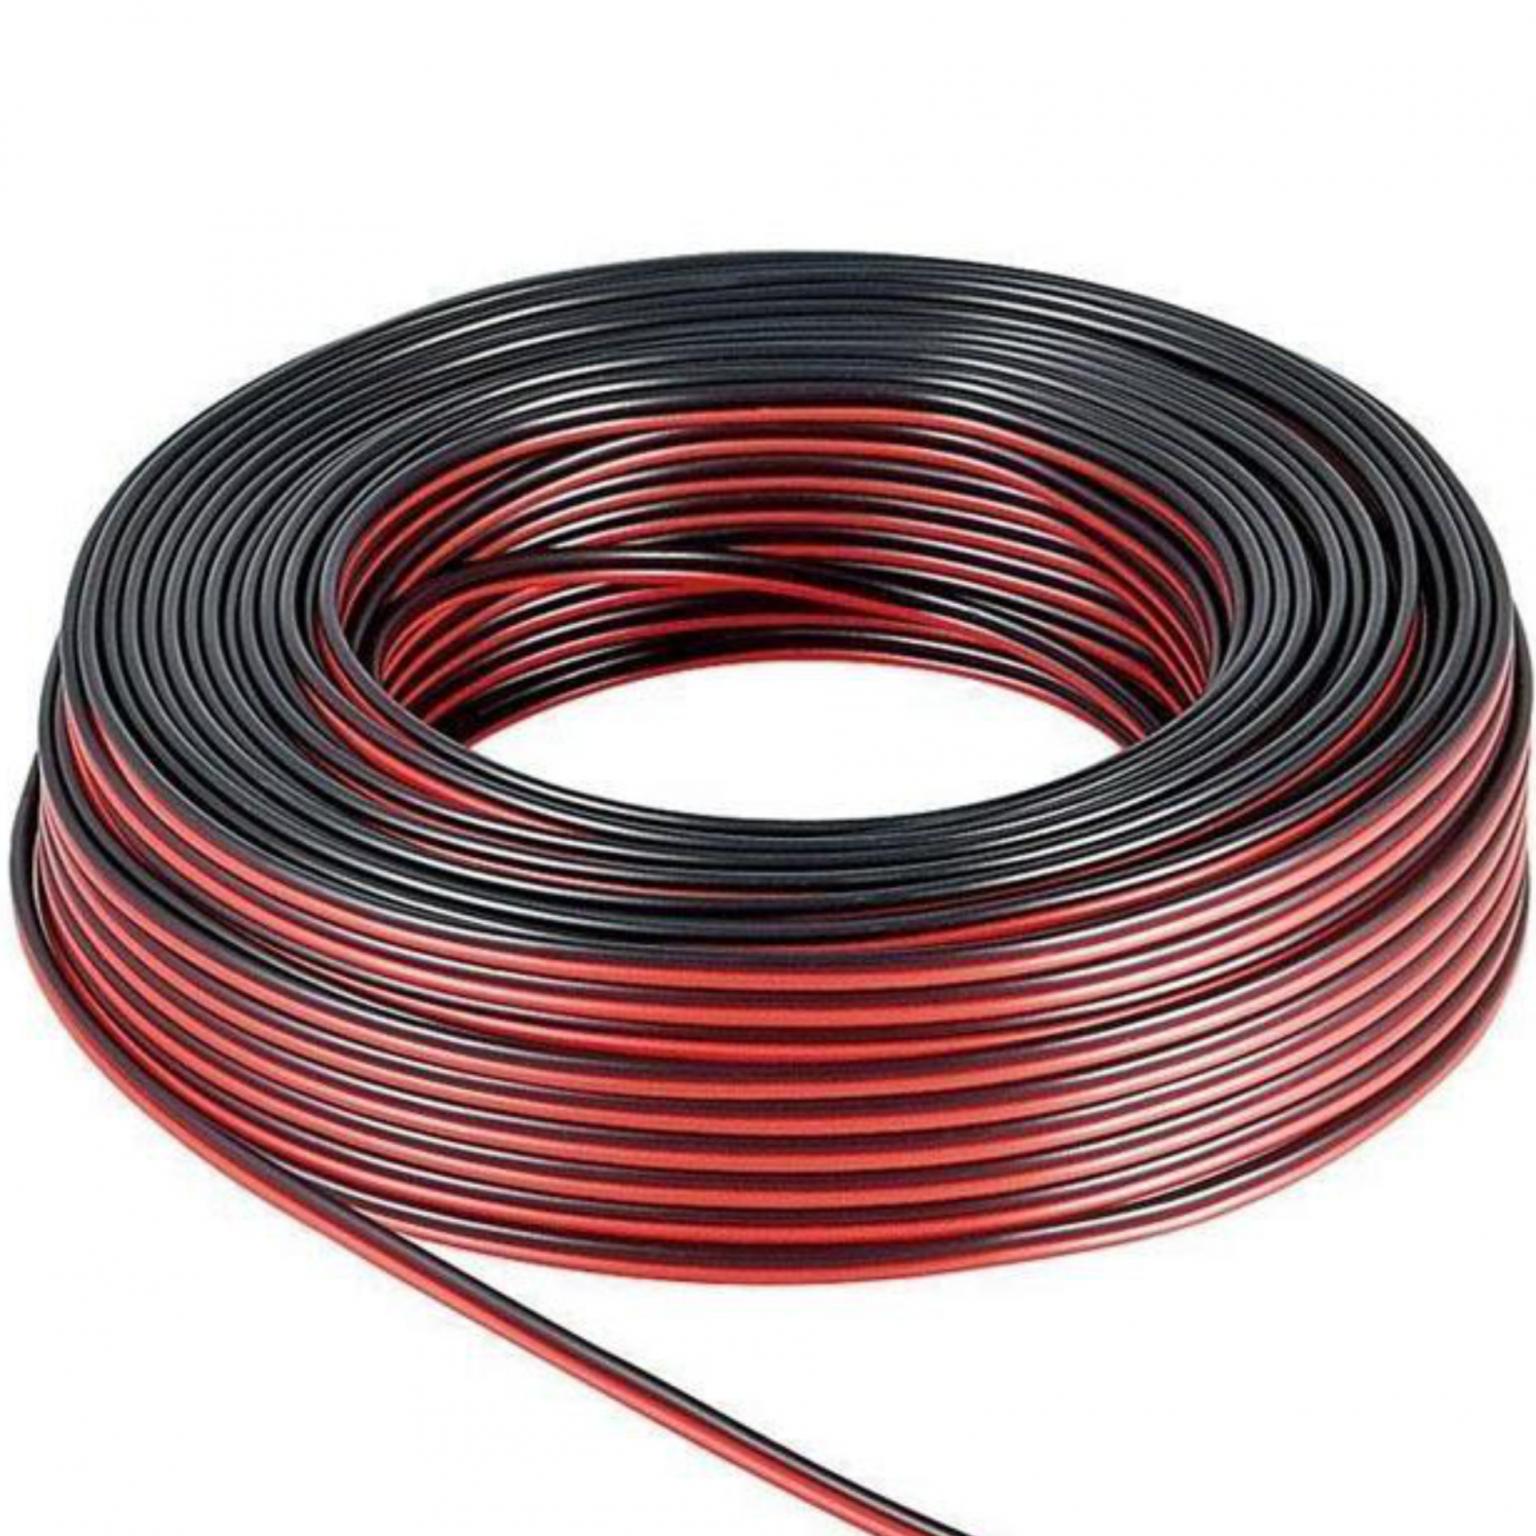 Image of Speaker cable red/black 10 m roll, cable diameter 2 x 0,75 mm? - Gooba